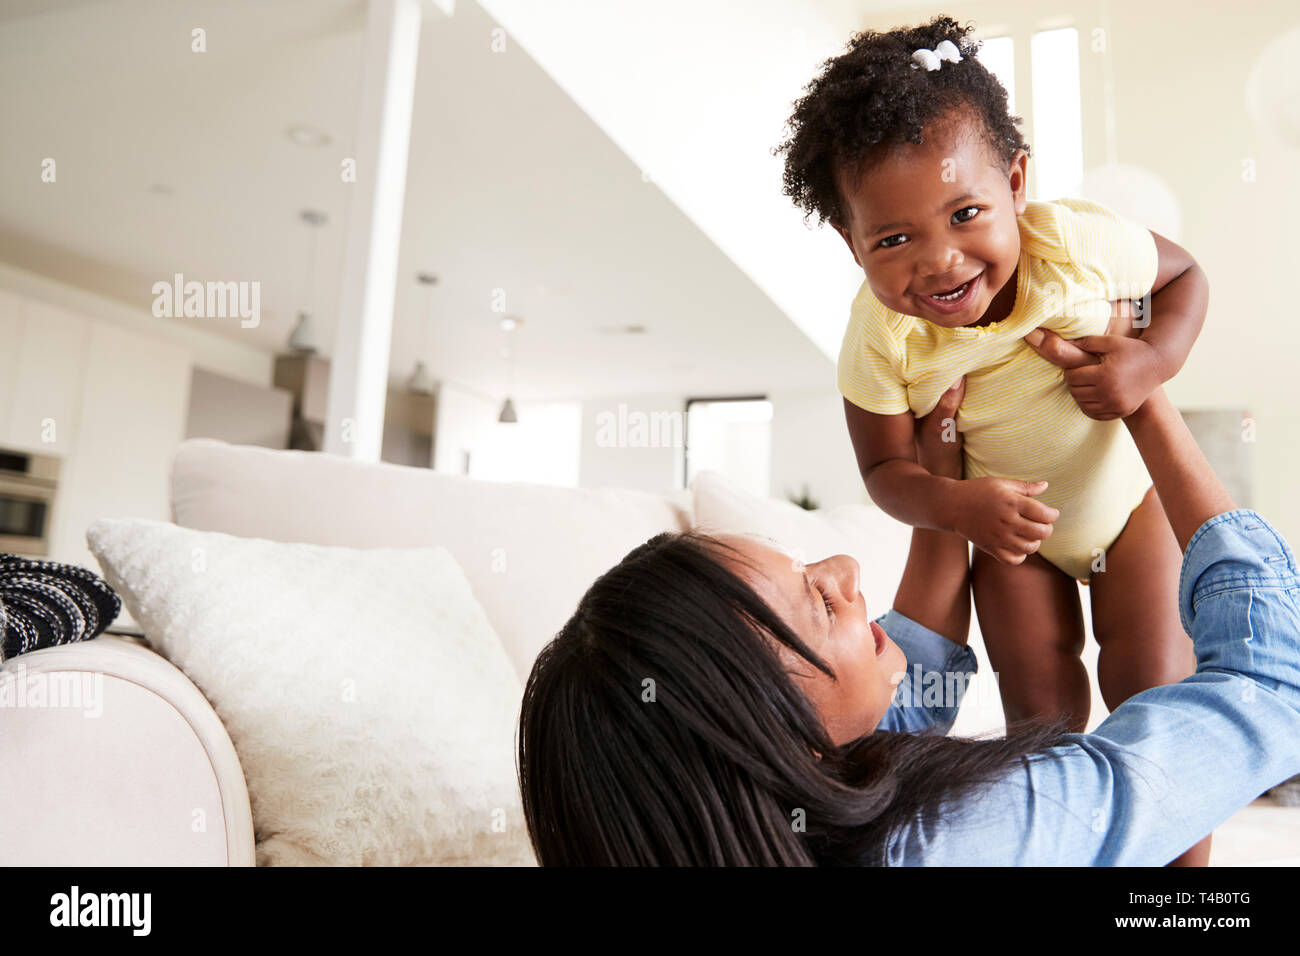 Mother Playing With Baby Daughter Lifting Her In The Air At Home Stock Photo